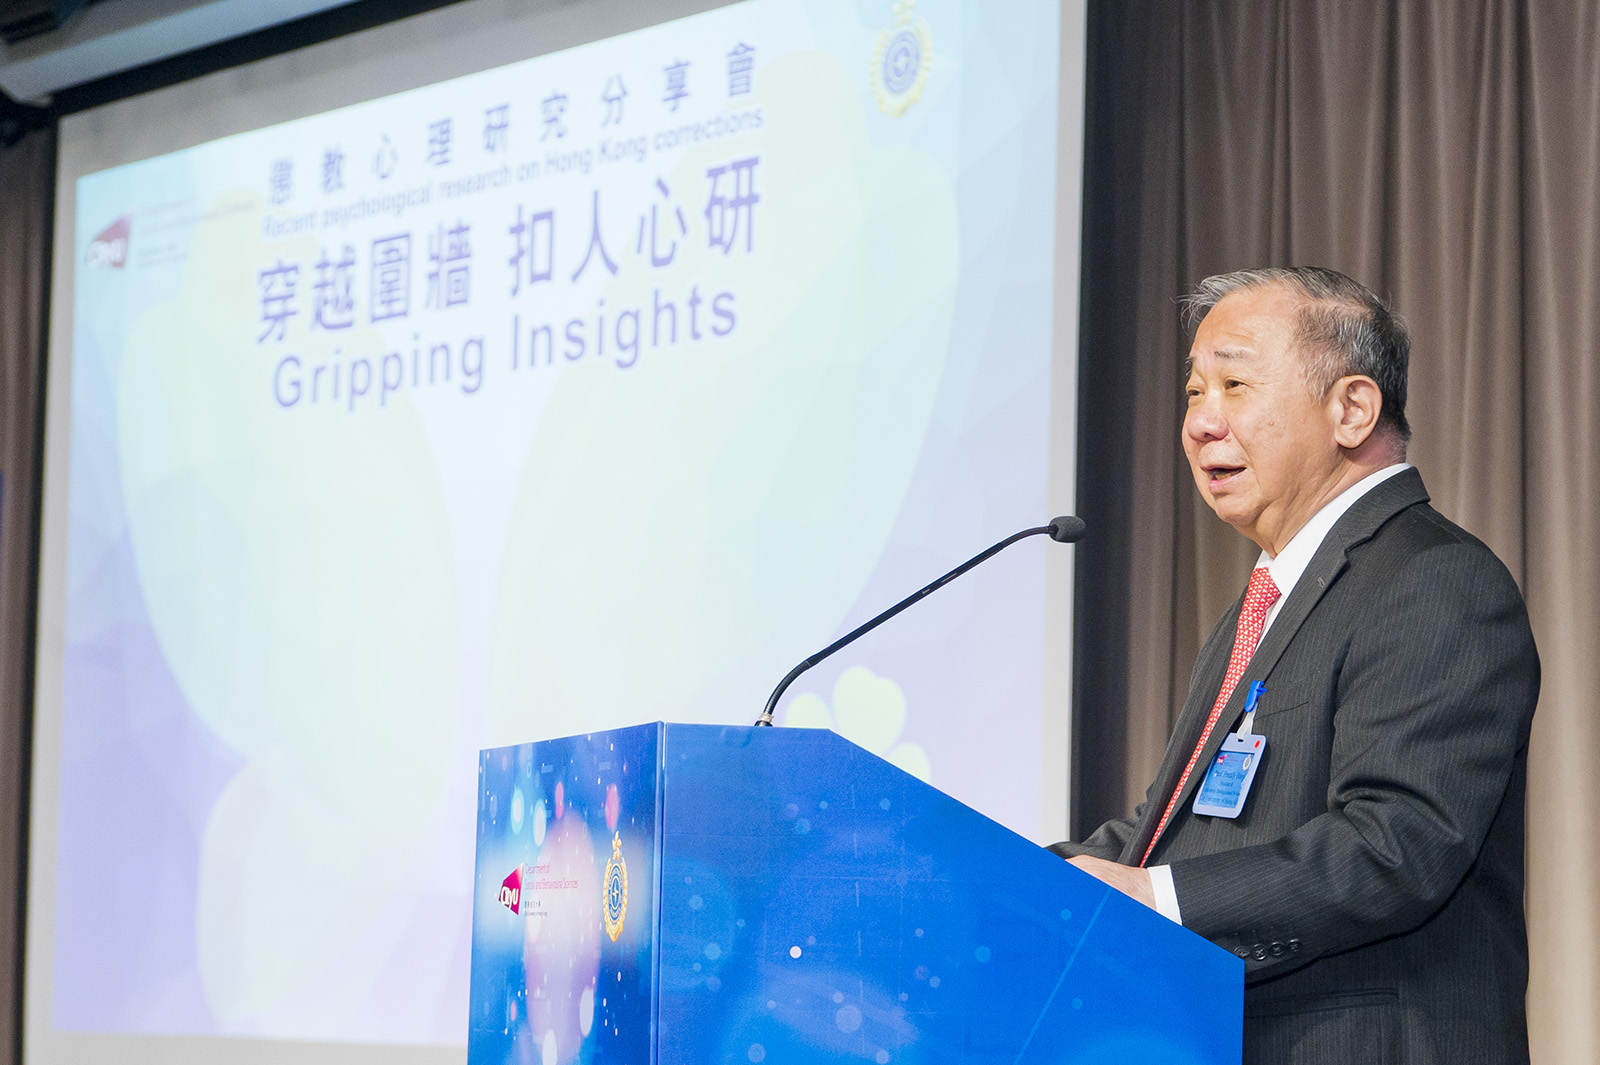 President Boey said that he was happy to see CityU’s team putting their research to great use in Hong Kong society.